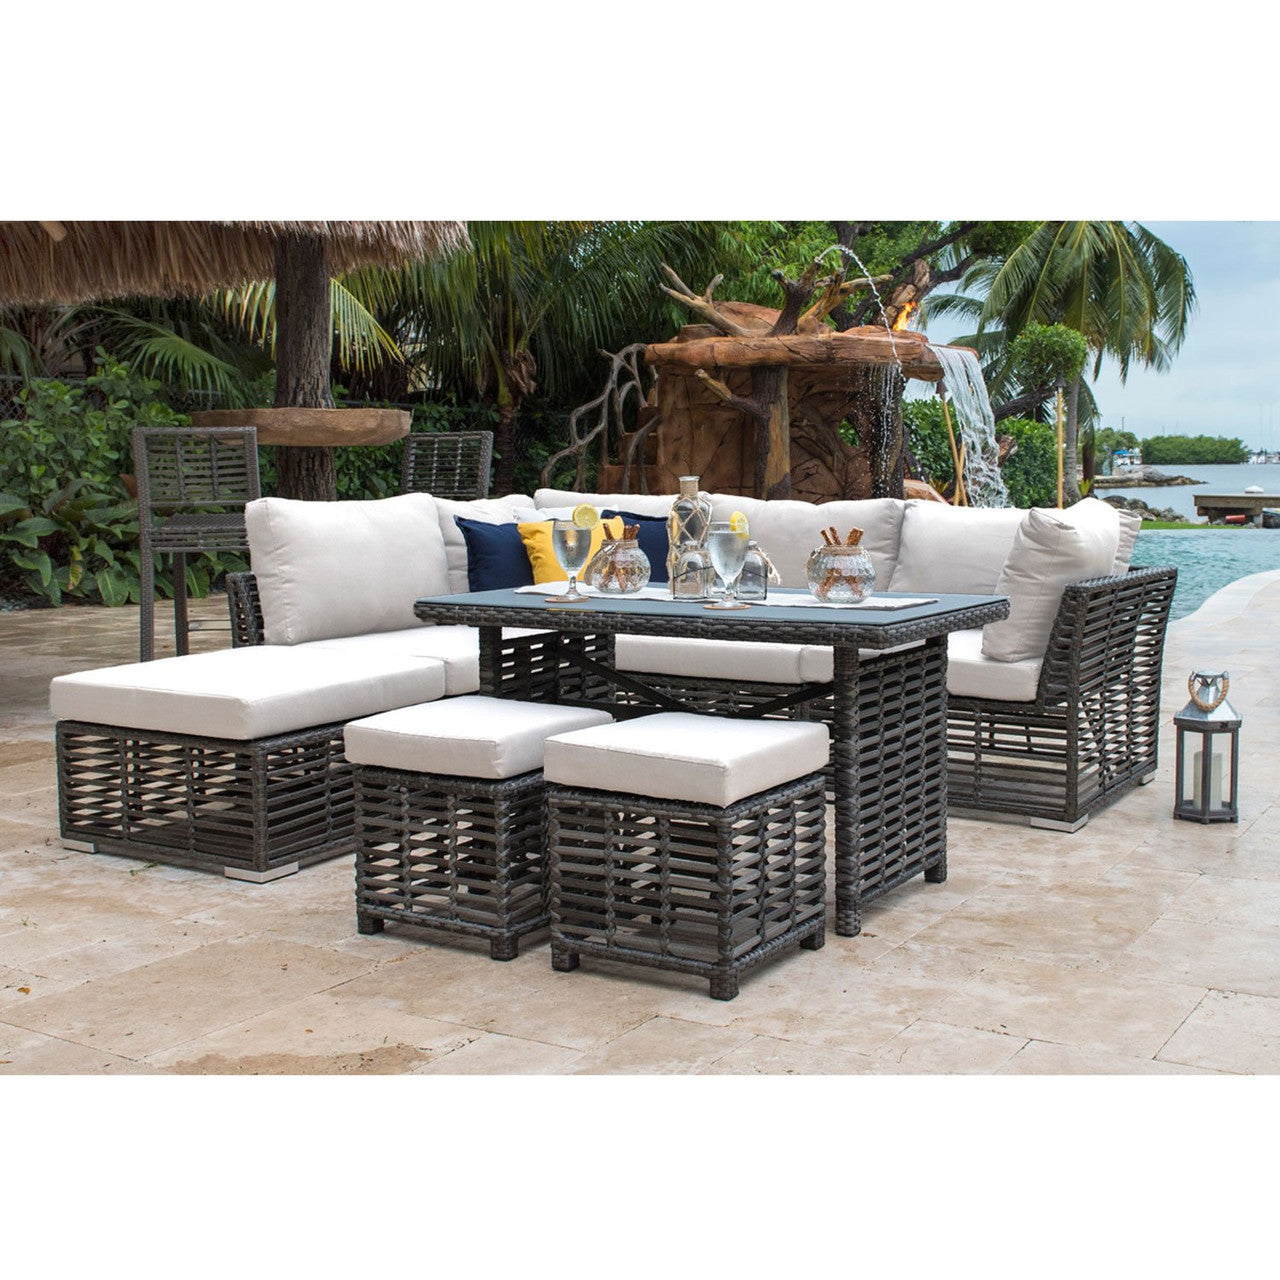 Panama Jack Graphite 7 PC High Coffee Table Sectional with Cushions